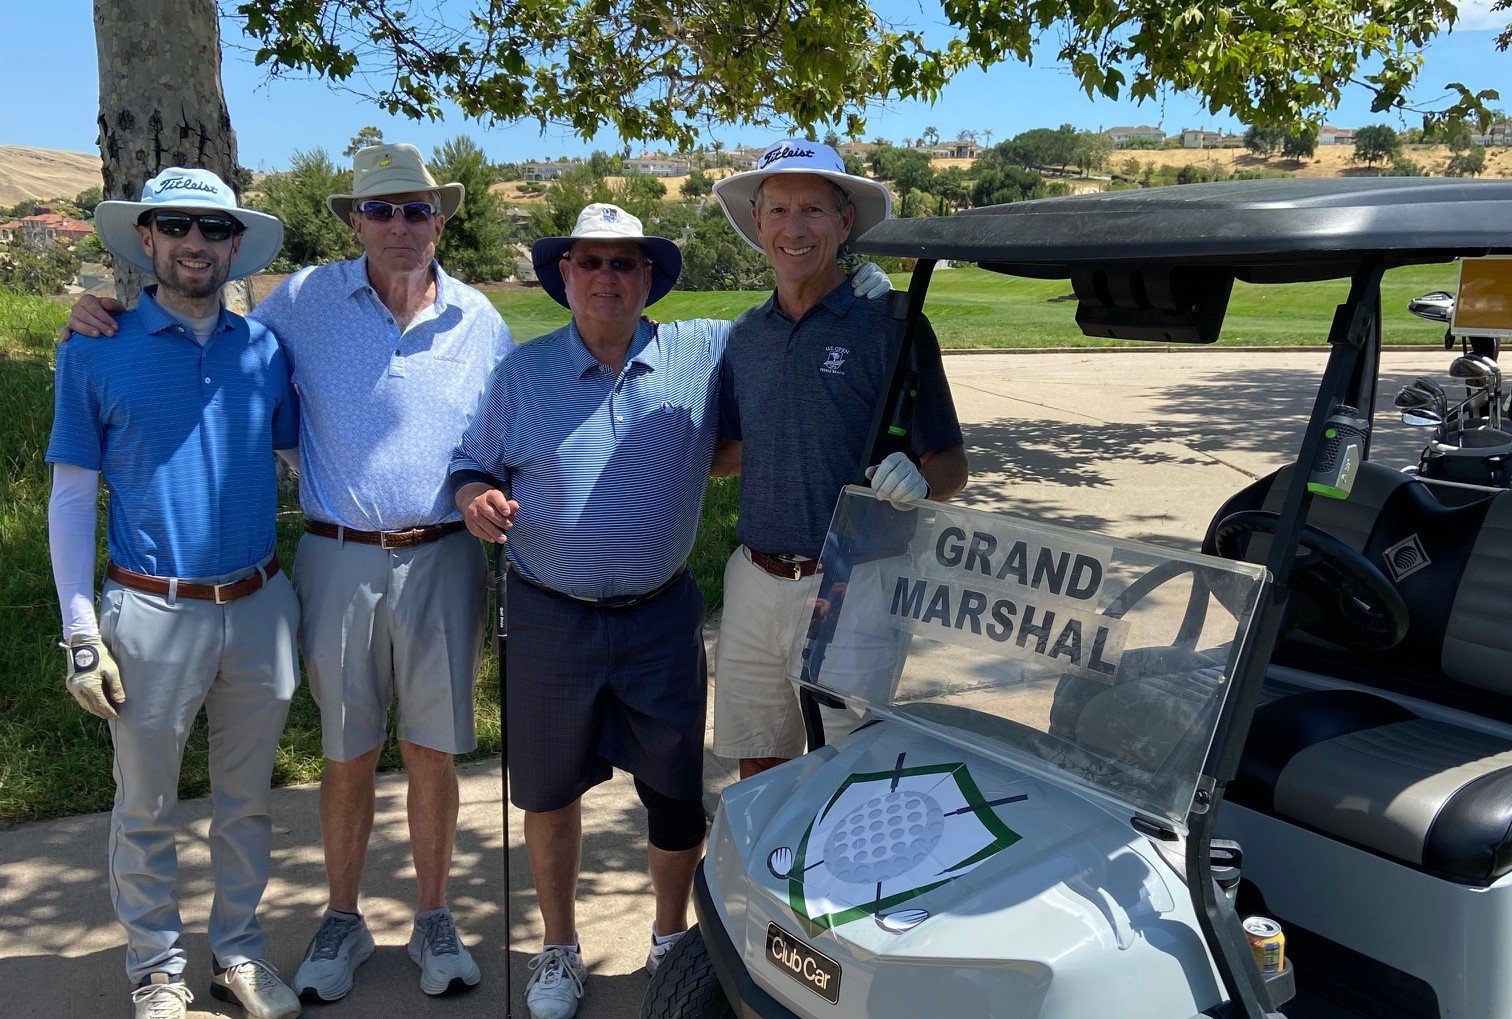   Mike, far right, is pictured with golf teammates Wade Meyercord, Joe Pfahnl and Chris Pope at the 39th Catholic Charities Invitational Golf Tournament on June 12 at Silver Creek Valley Country Club.  